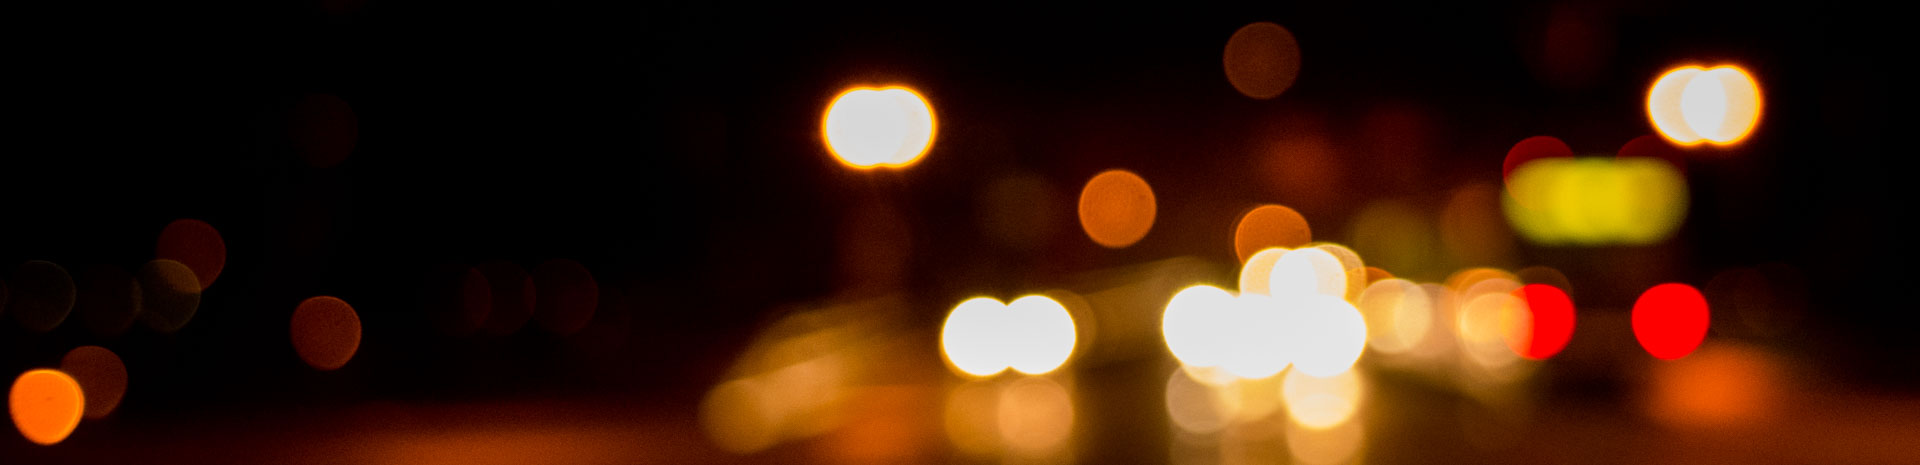 blurry circular lights from automobiles and a street car at night